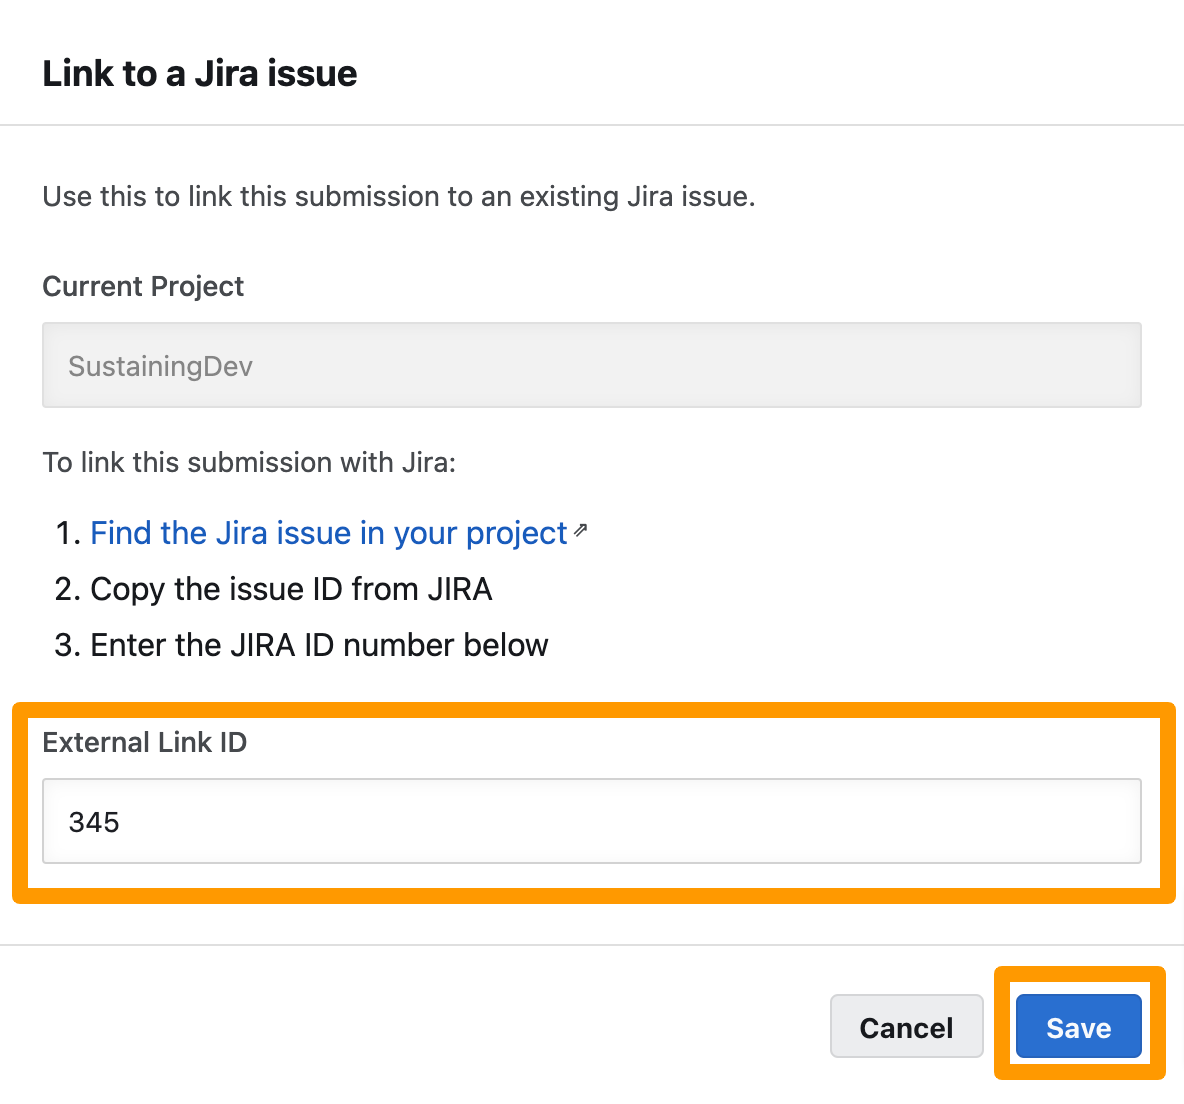 In External Link ID, enter the Jira issue ID